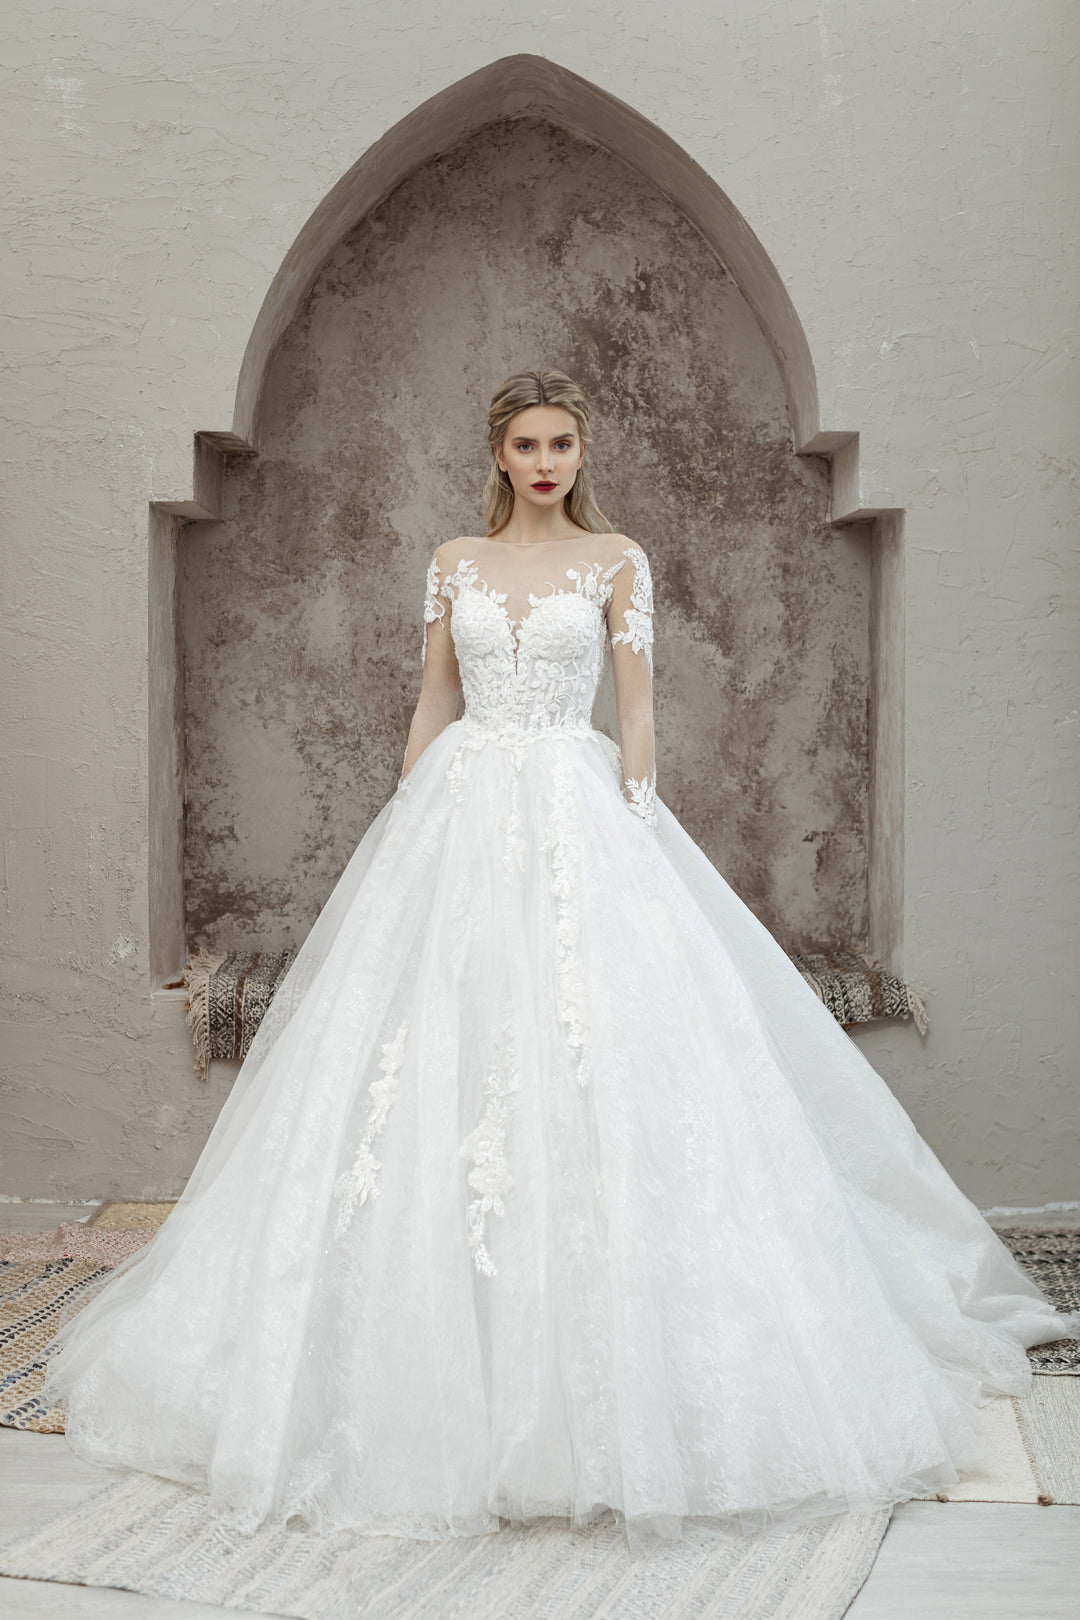 Romantic Floral Lace Ballgown Wedding Dress with Bustier Bodice